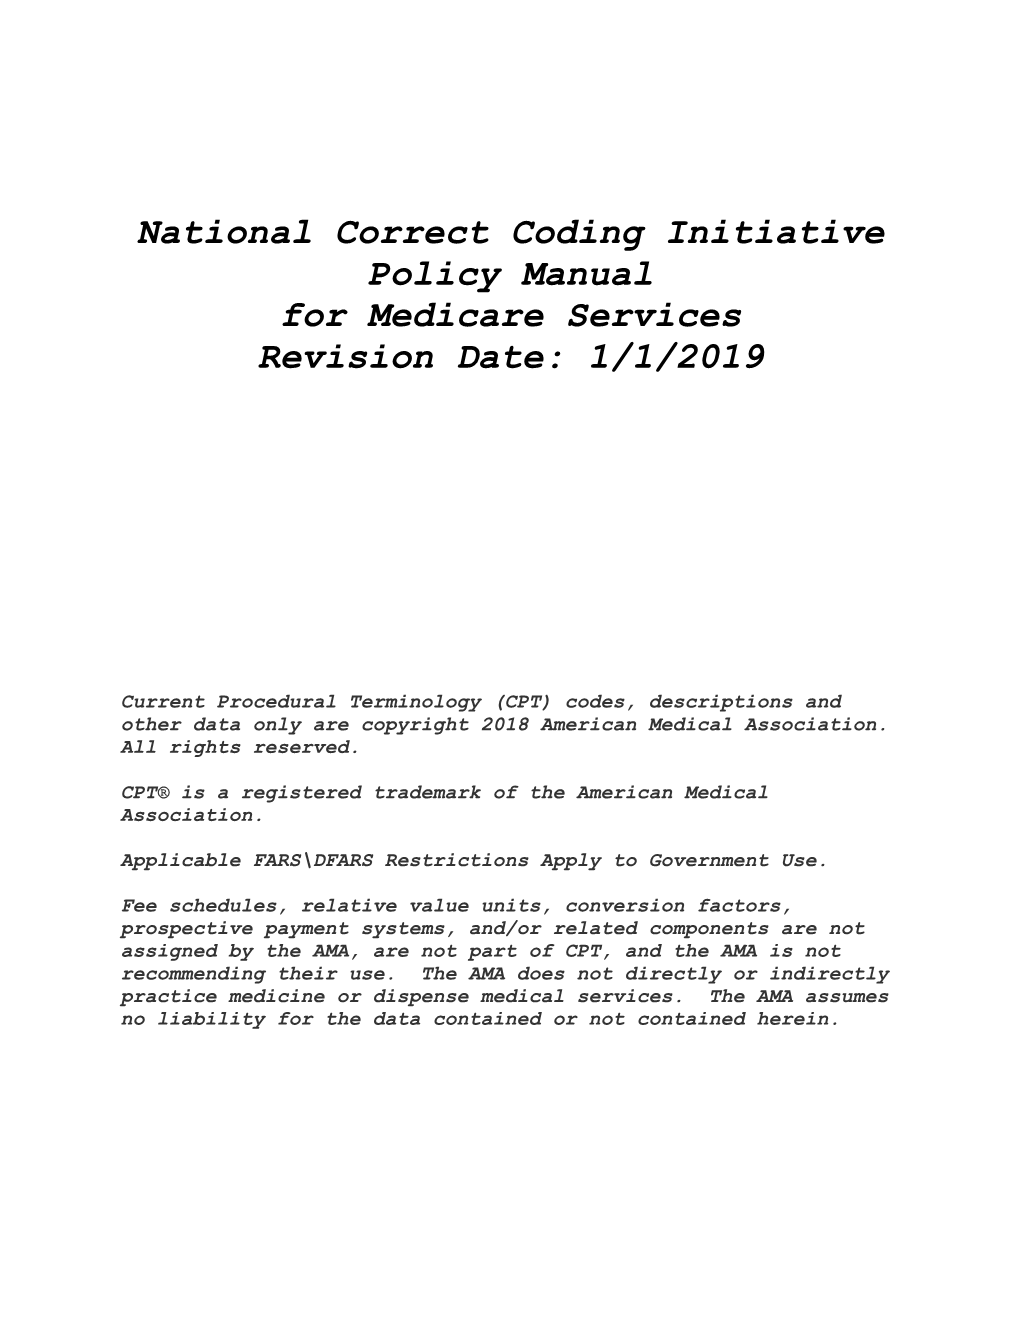 National Correct Coding Initiative Policy Manual for Medicare Services Revision Date: 1/1/2019